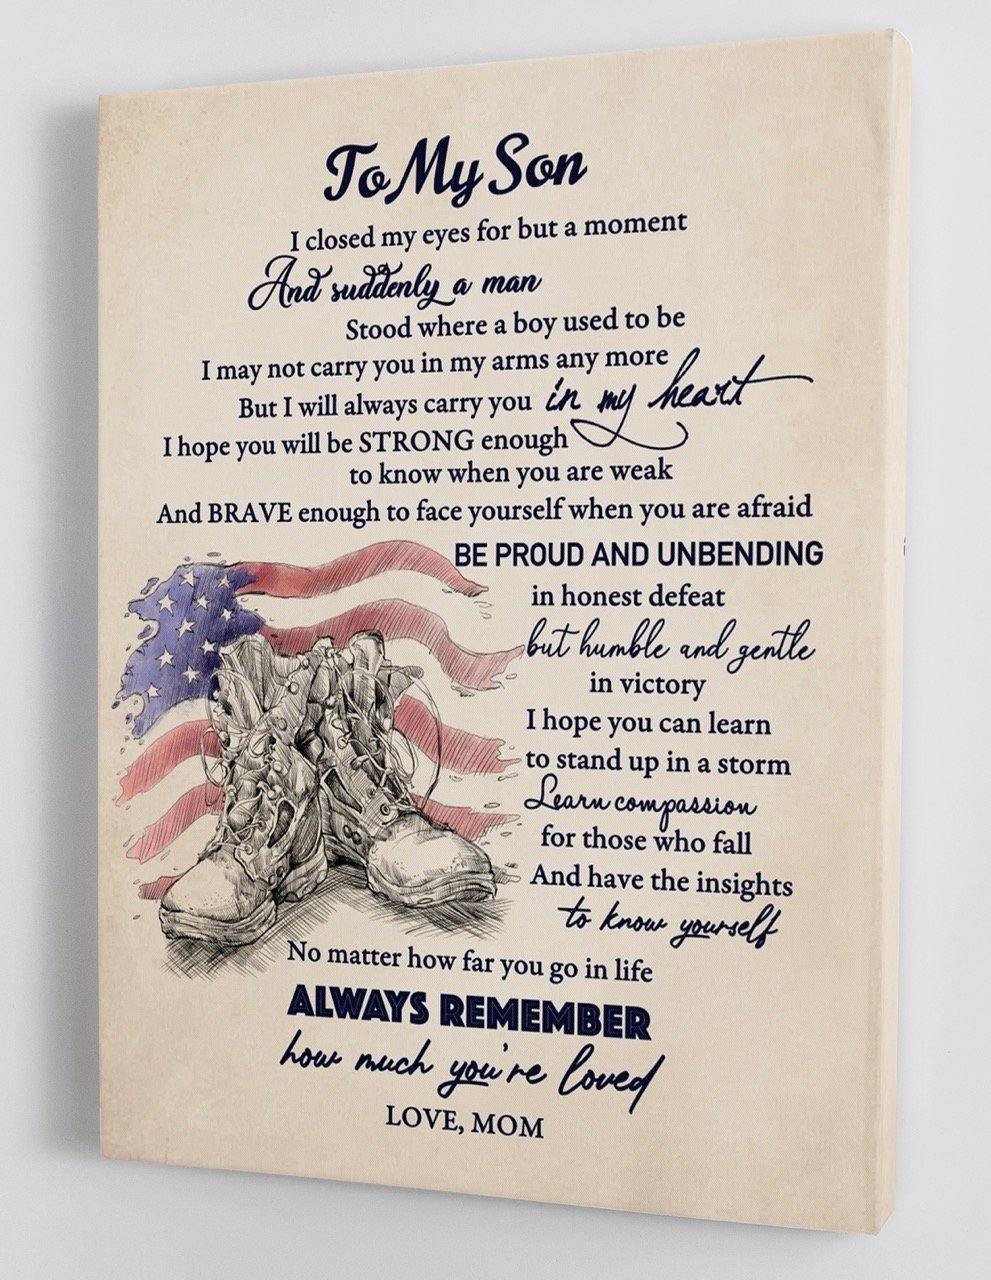 To My Son - From Mom - Military Framed Canvas Gift MS023 - DivesArt LLC